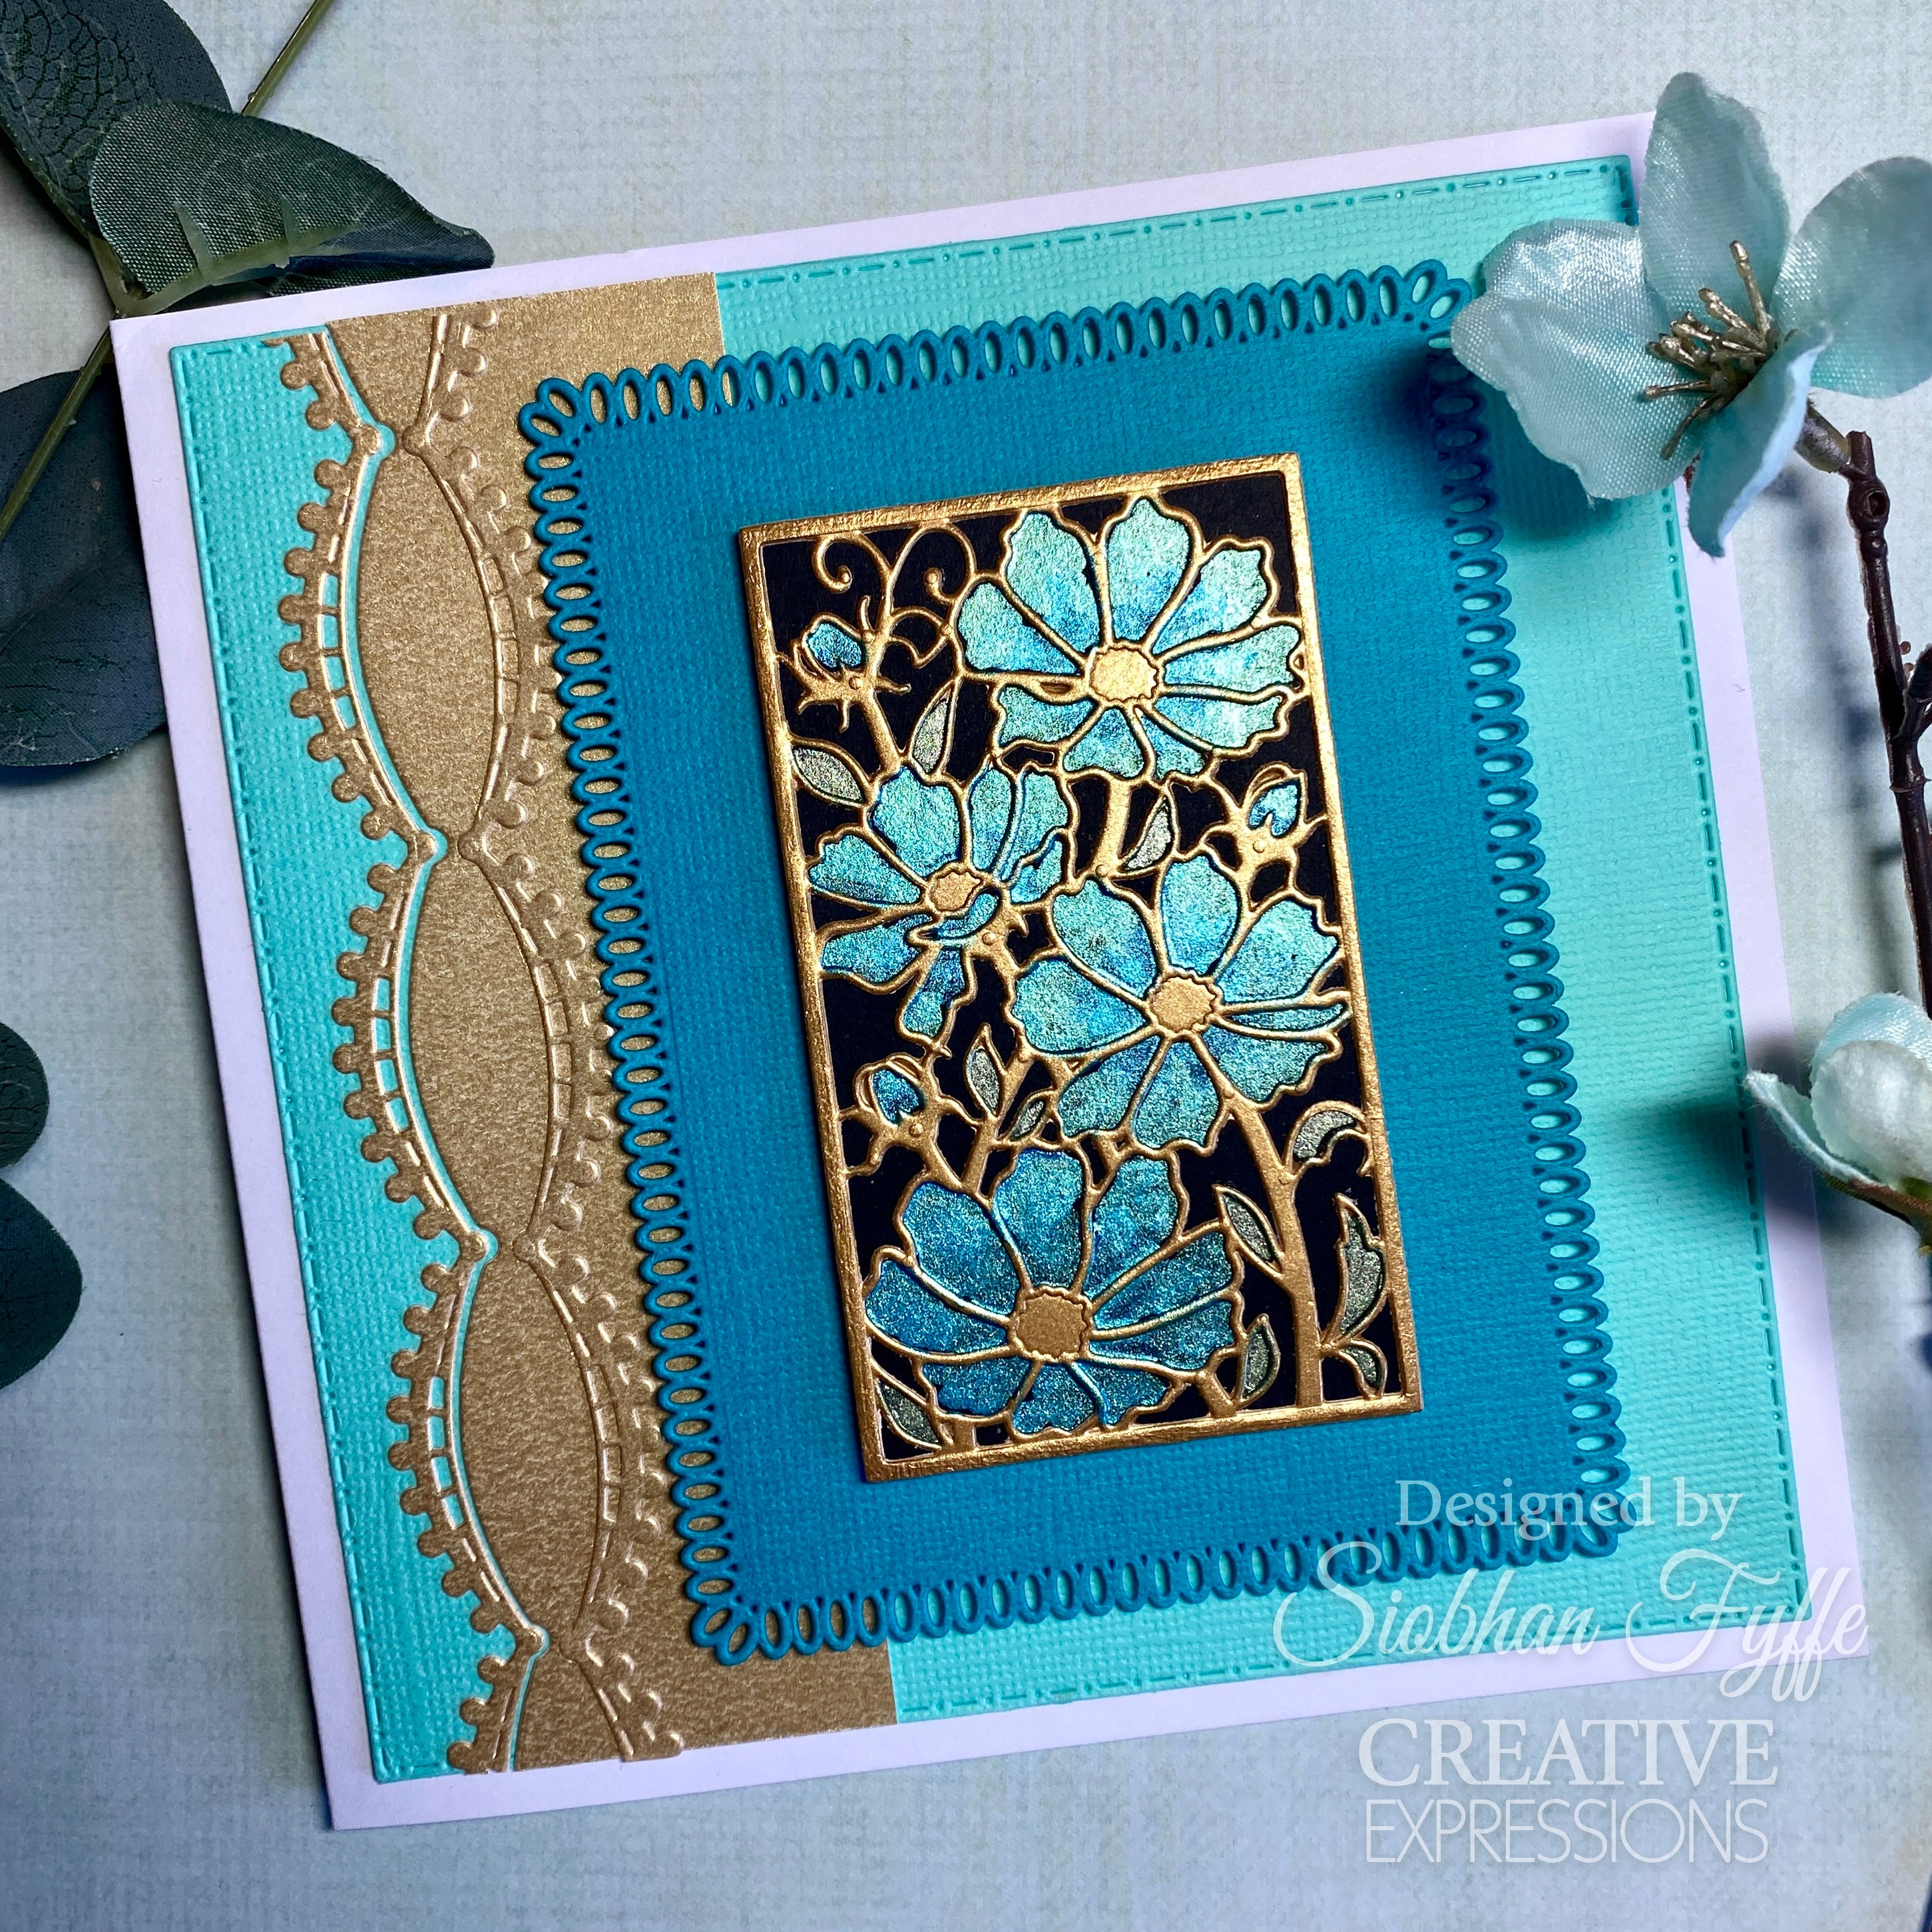 Creative Expressions Sue Wilson Border Coronet Lace Craft Die